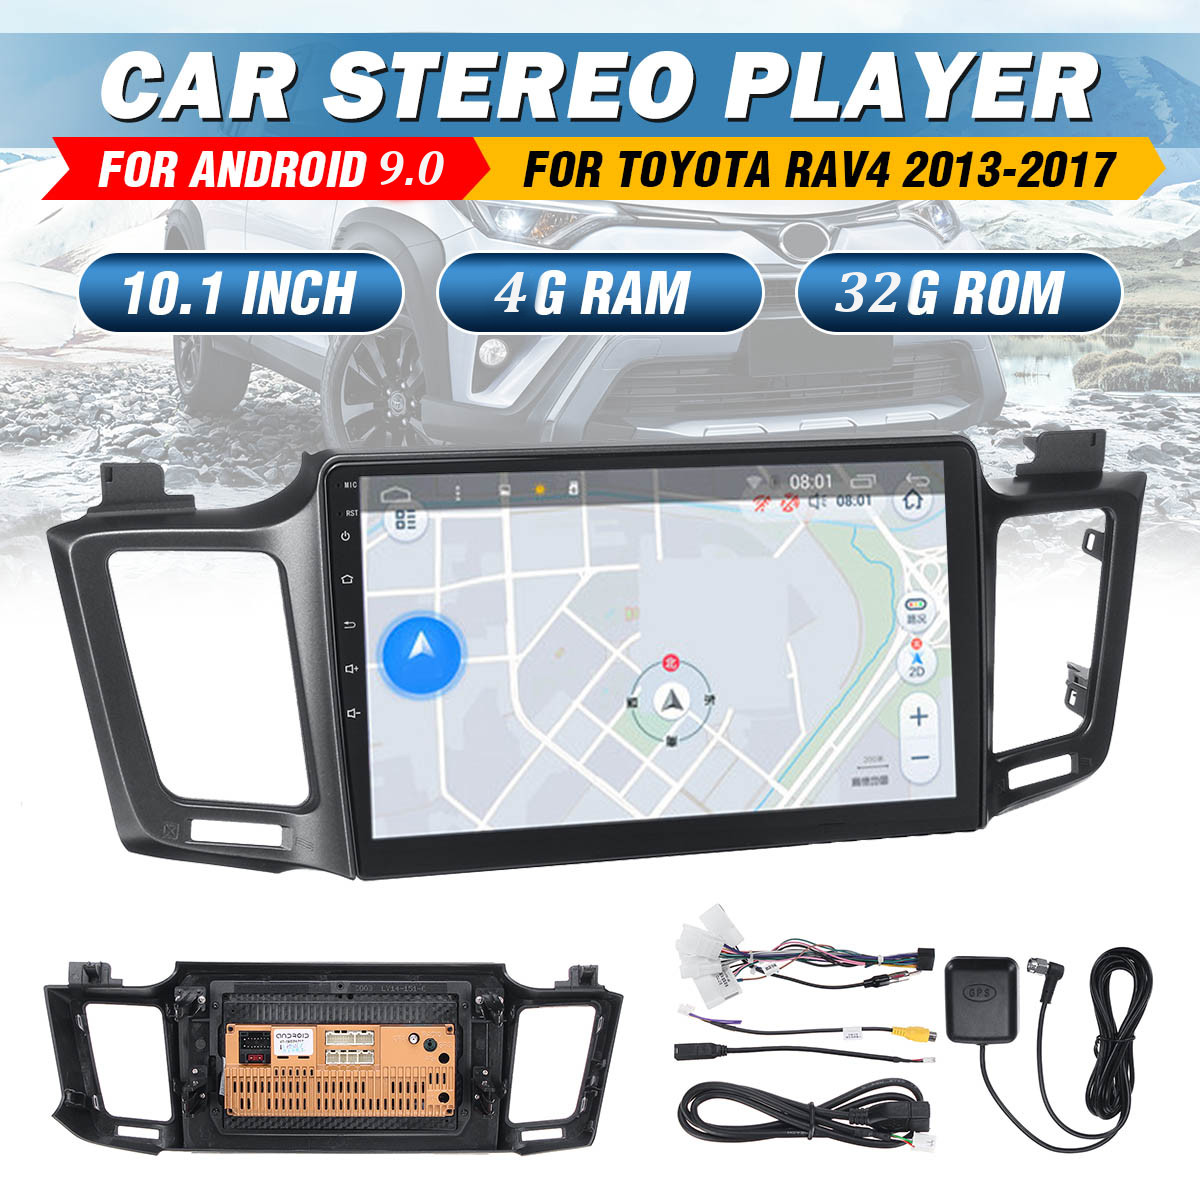 YUEHOO 10.1 Inch 2 DIN for Android 9.0 Car Stereo 4+32G Quad Core MP5 Player GPS WIFI 4G FM AM RDS Radio for Toyota RAV4 2013-2017